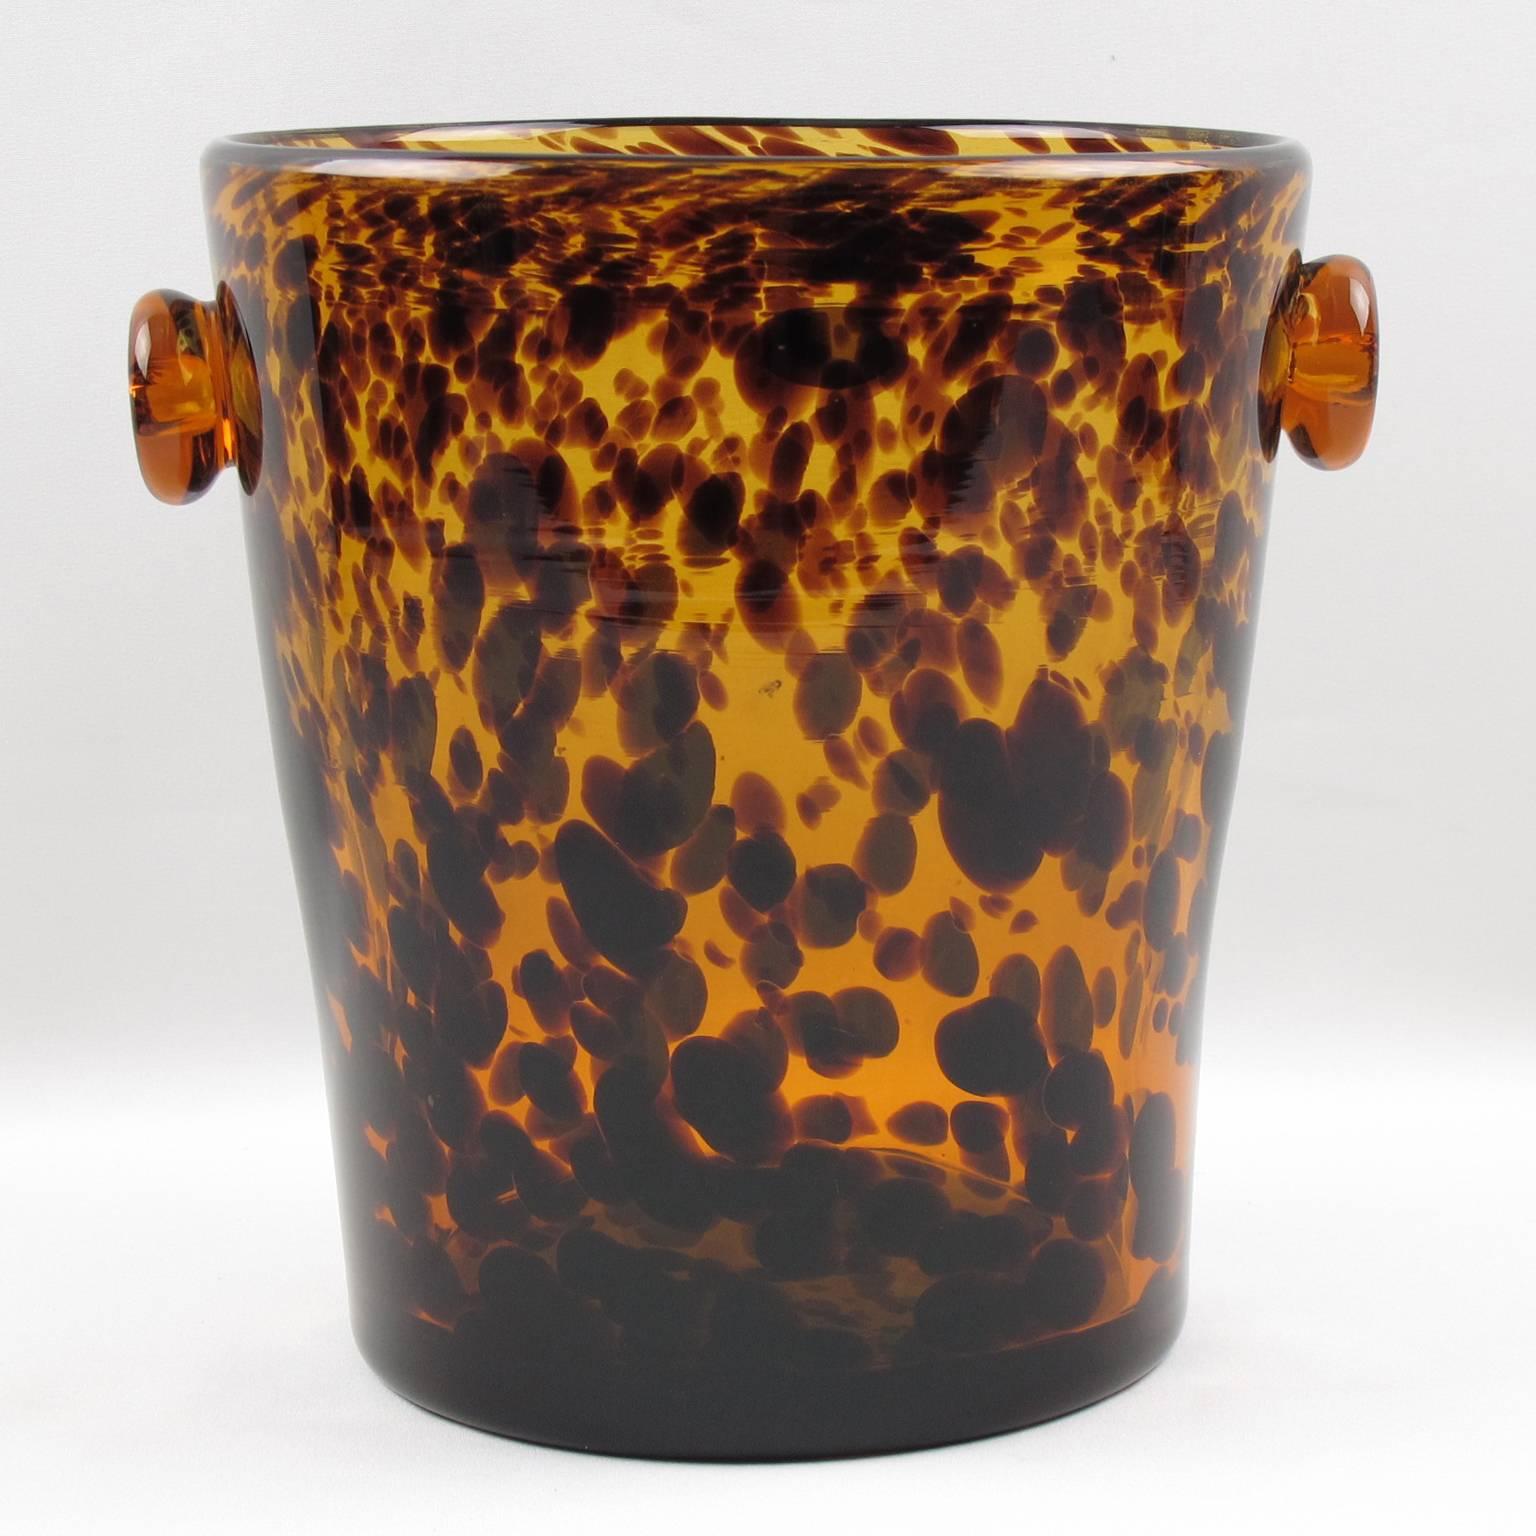 Mid-Century Modernist French designer Christian Dior glass Champagne or wine cooler-ice bucket. From the Dior Home collection mouth-blown in Empoli, Italy in the 1960s. Exclusive tortoise shell color flowing pattern. Polished pontil mark on the